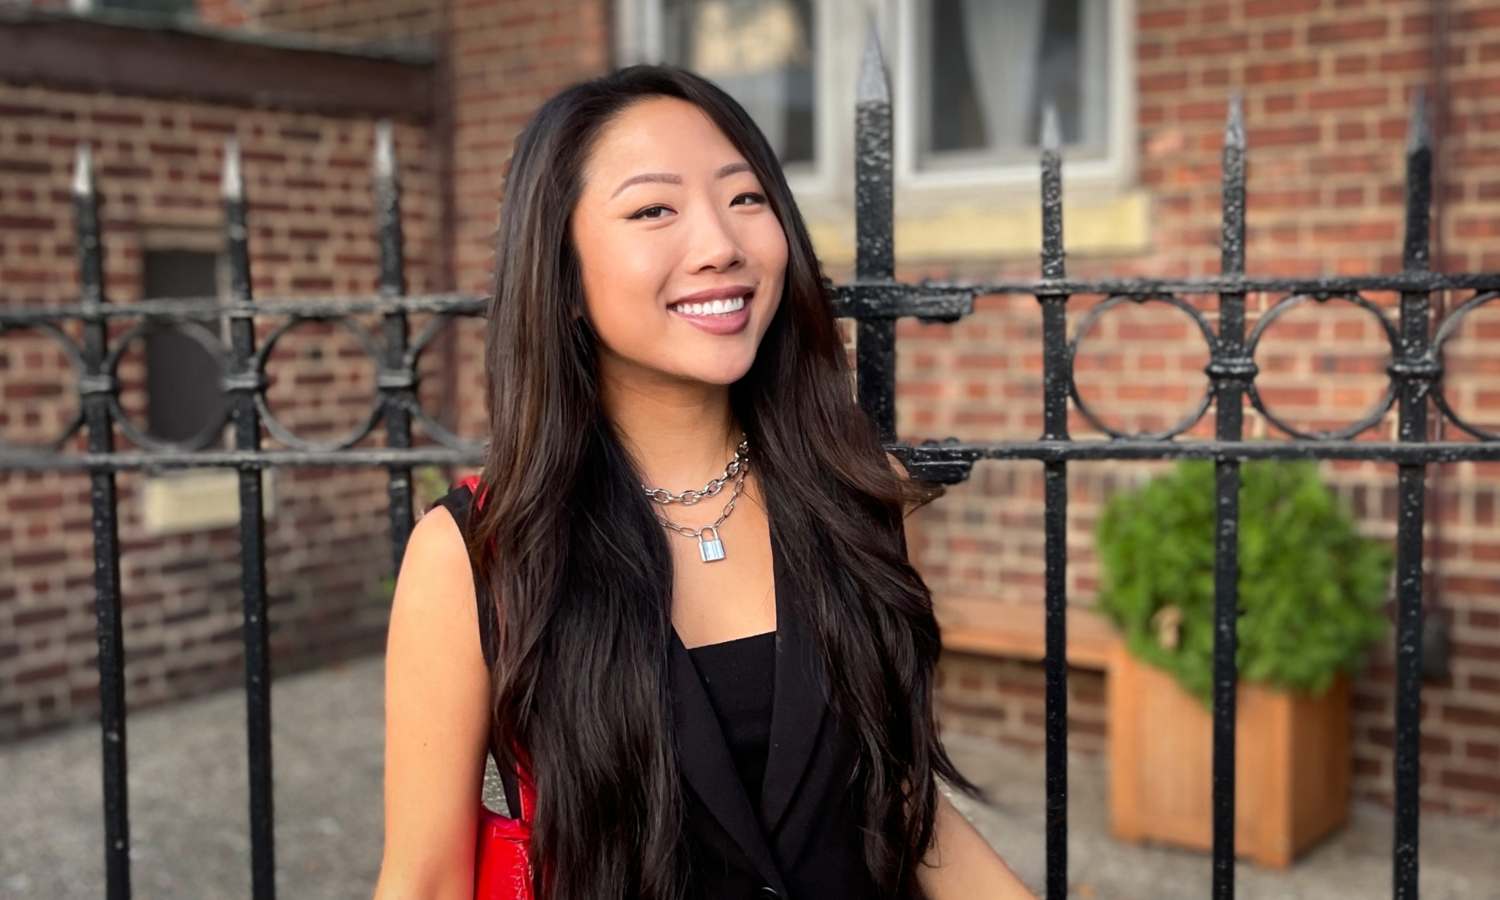 Sbf Met Tiffany Fong Crypto Crime Reporter 10 Times While House Arrest While